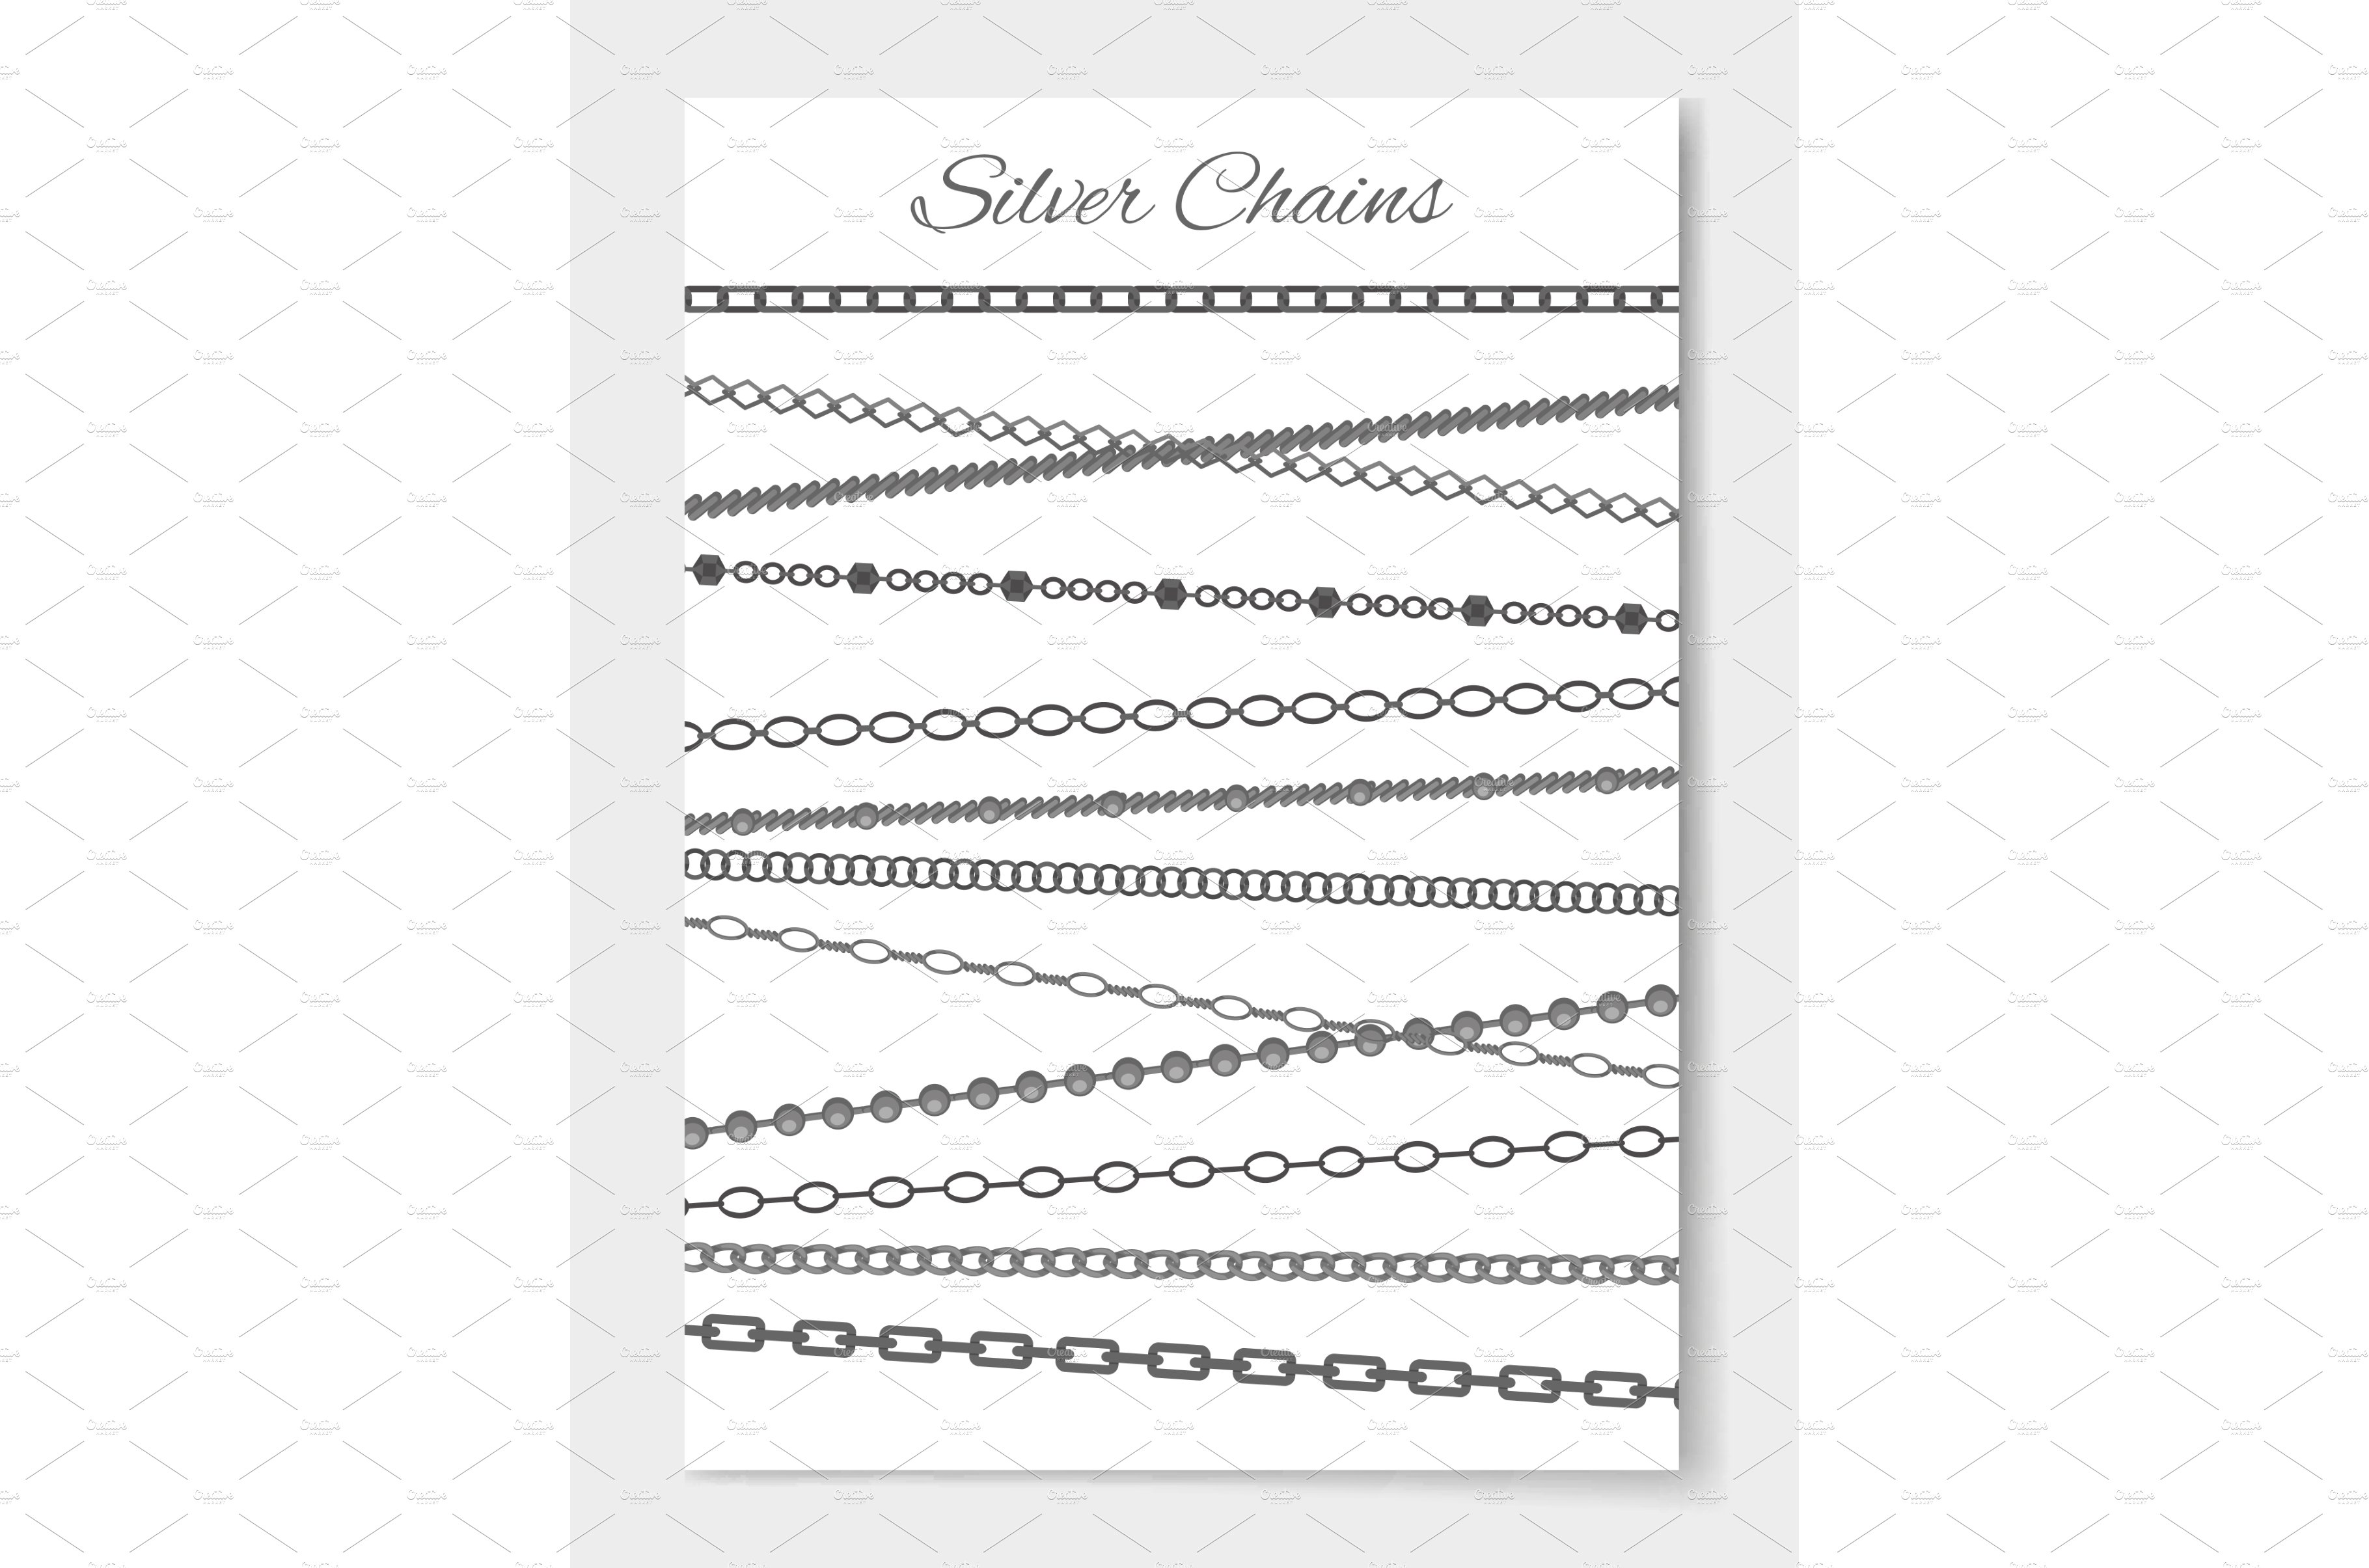 Silver Chains Poster andTitle Vector cover image.